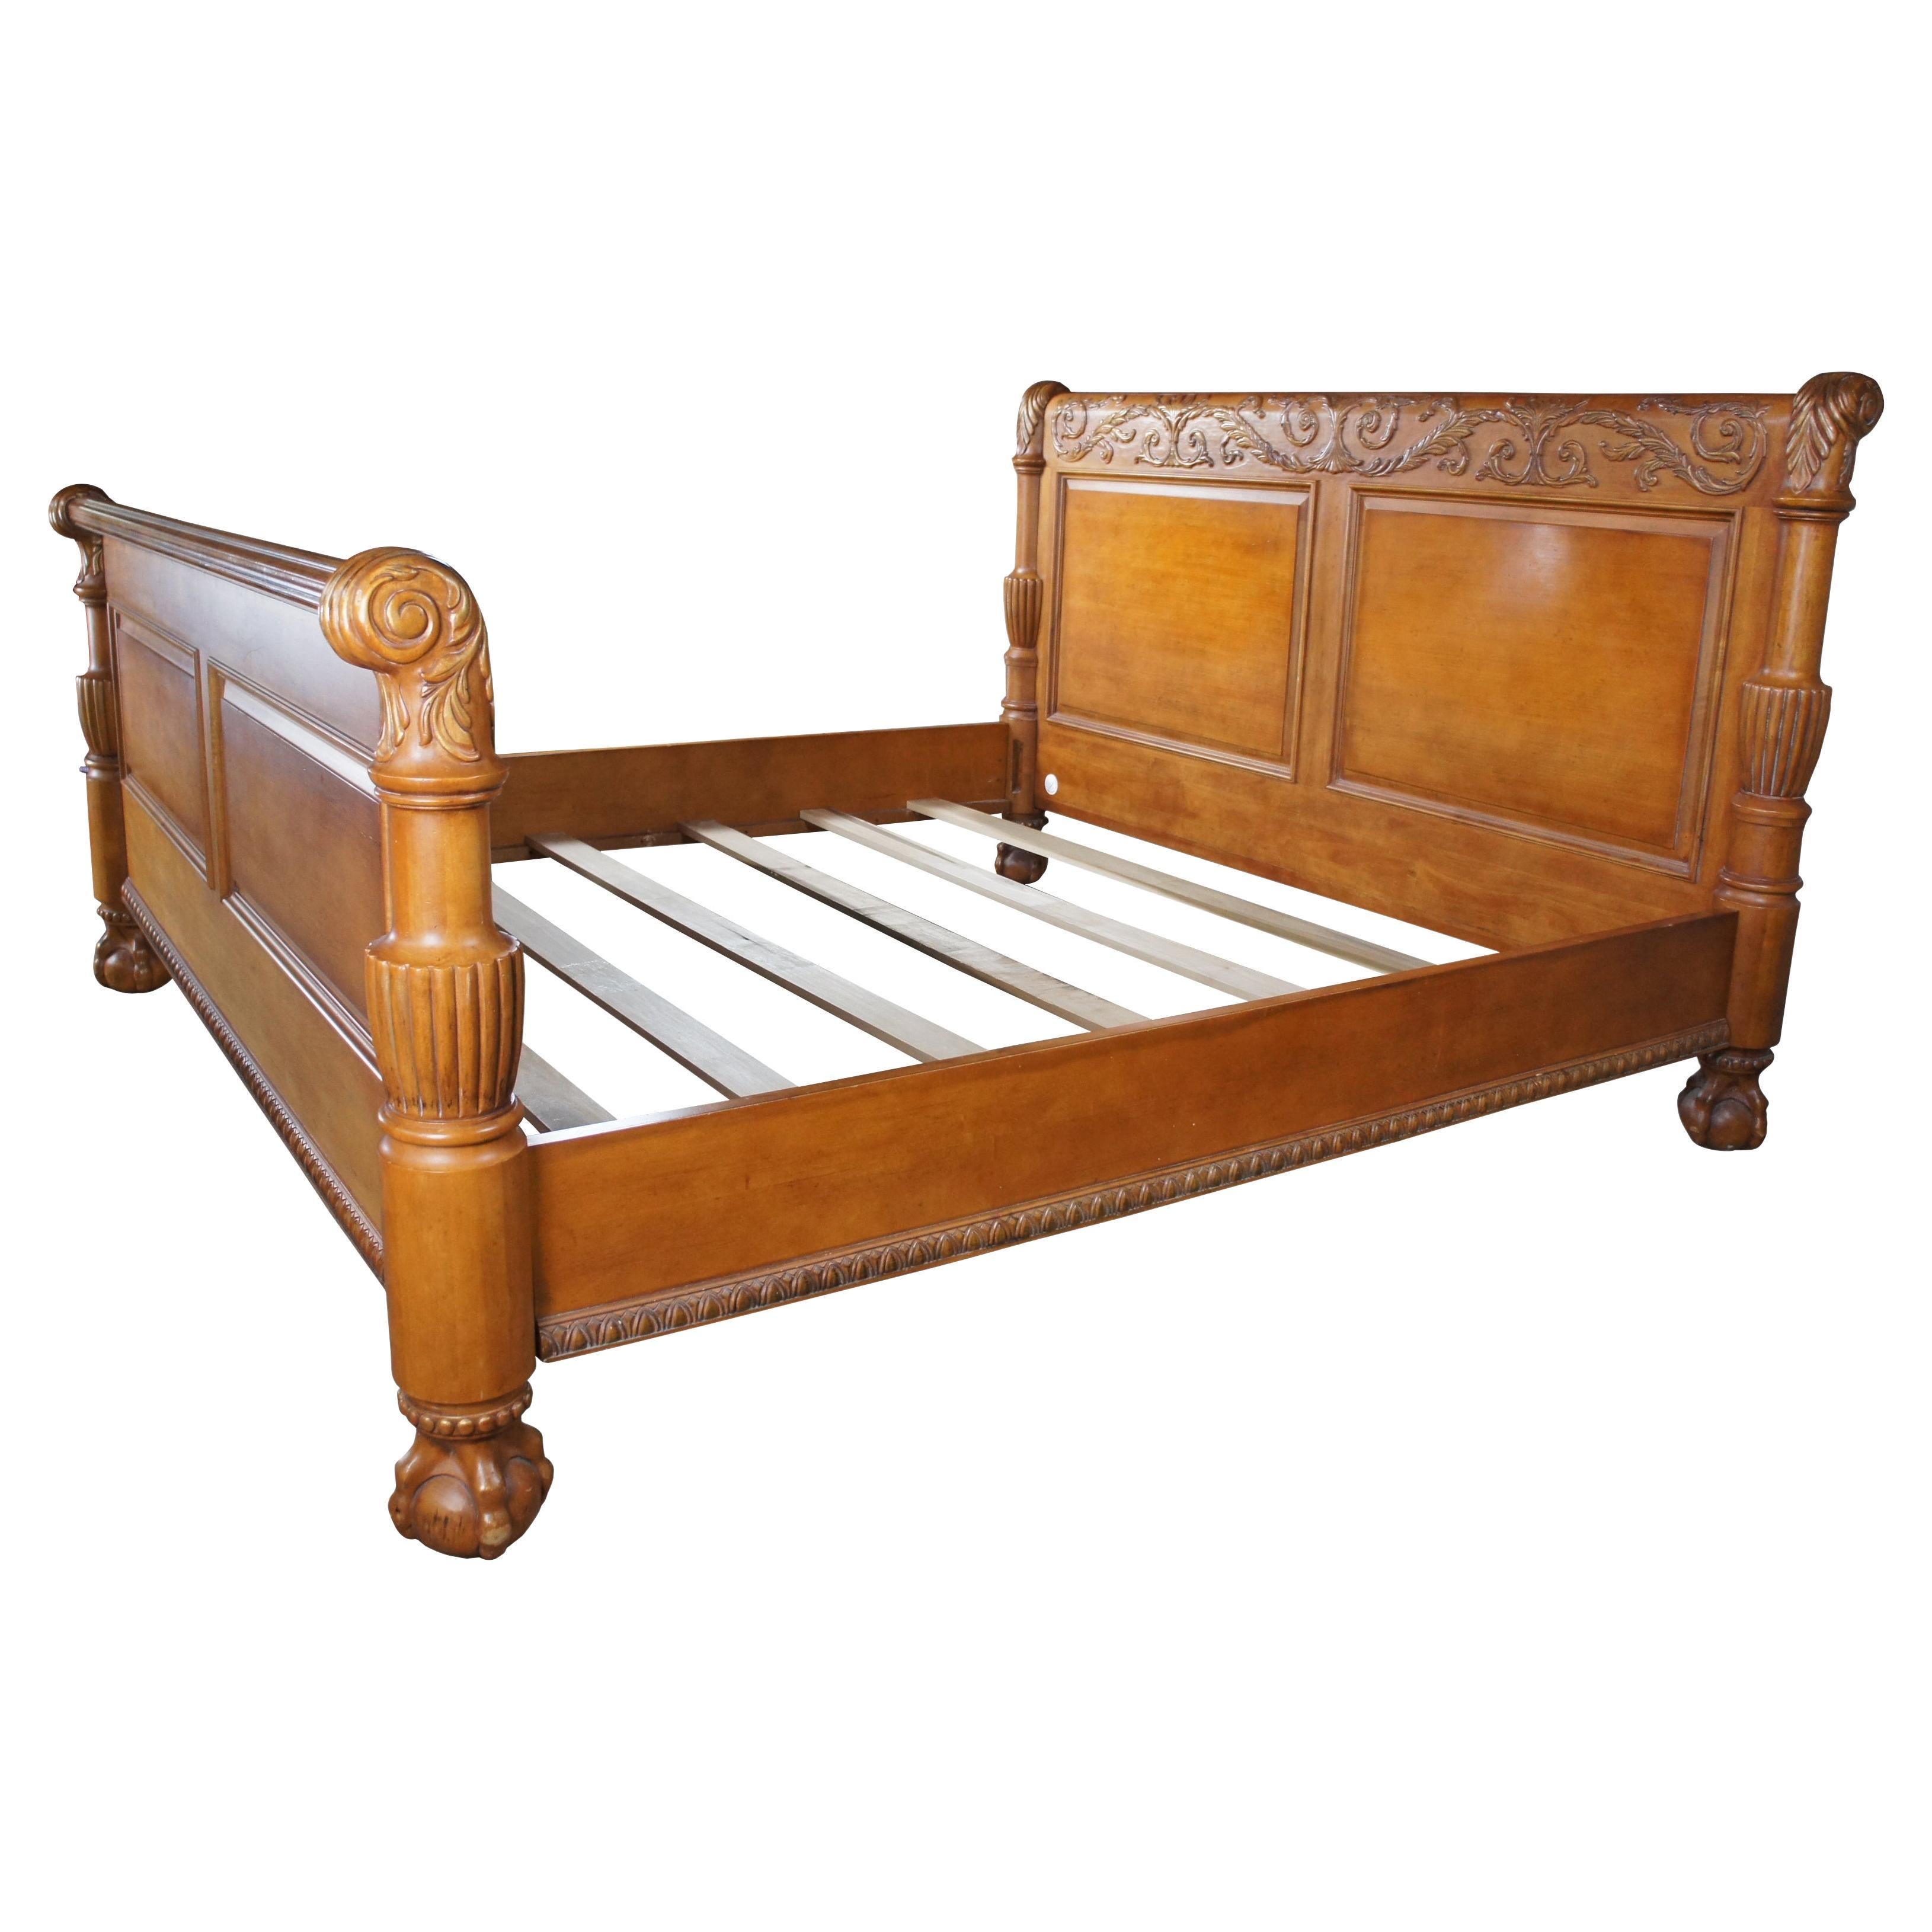 Century Furniture English Chippendale Style Mahogany King Sleigh Bed 461-176H